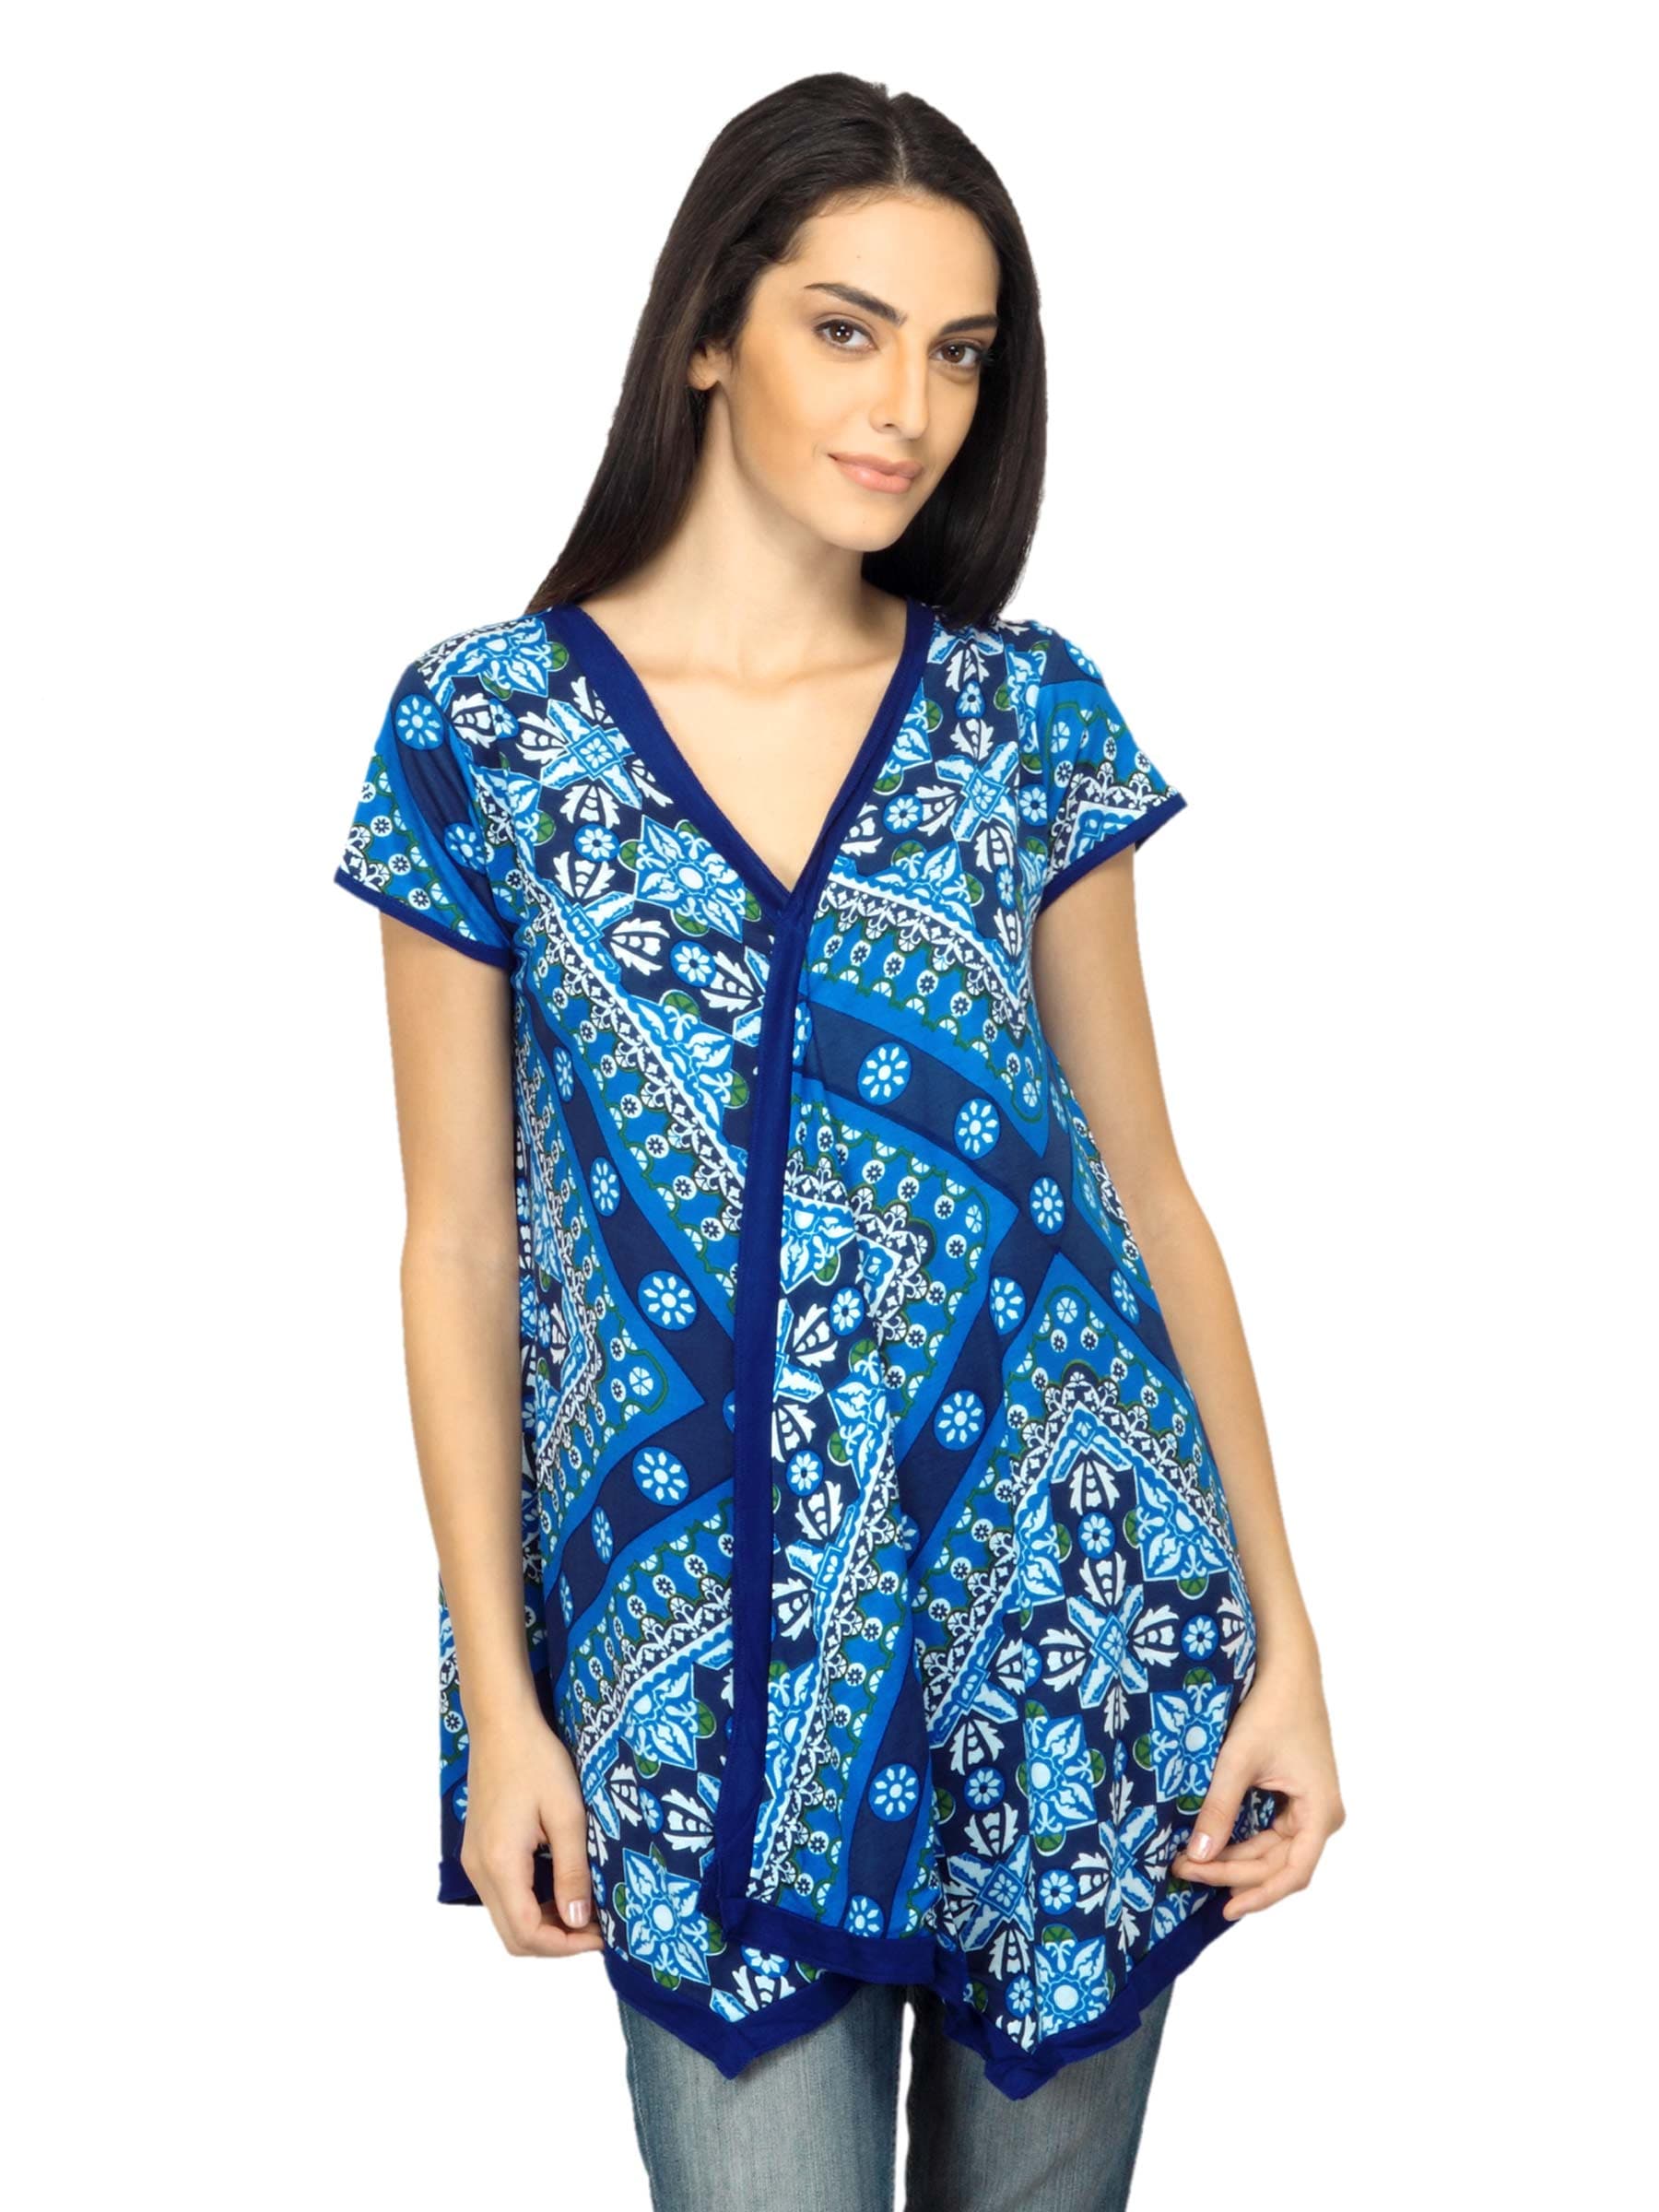 Scullers For Her Printed Blue Tops